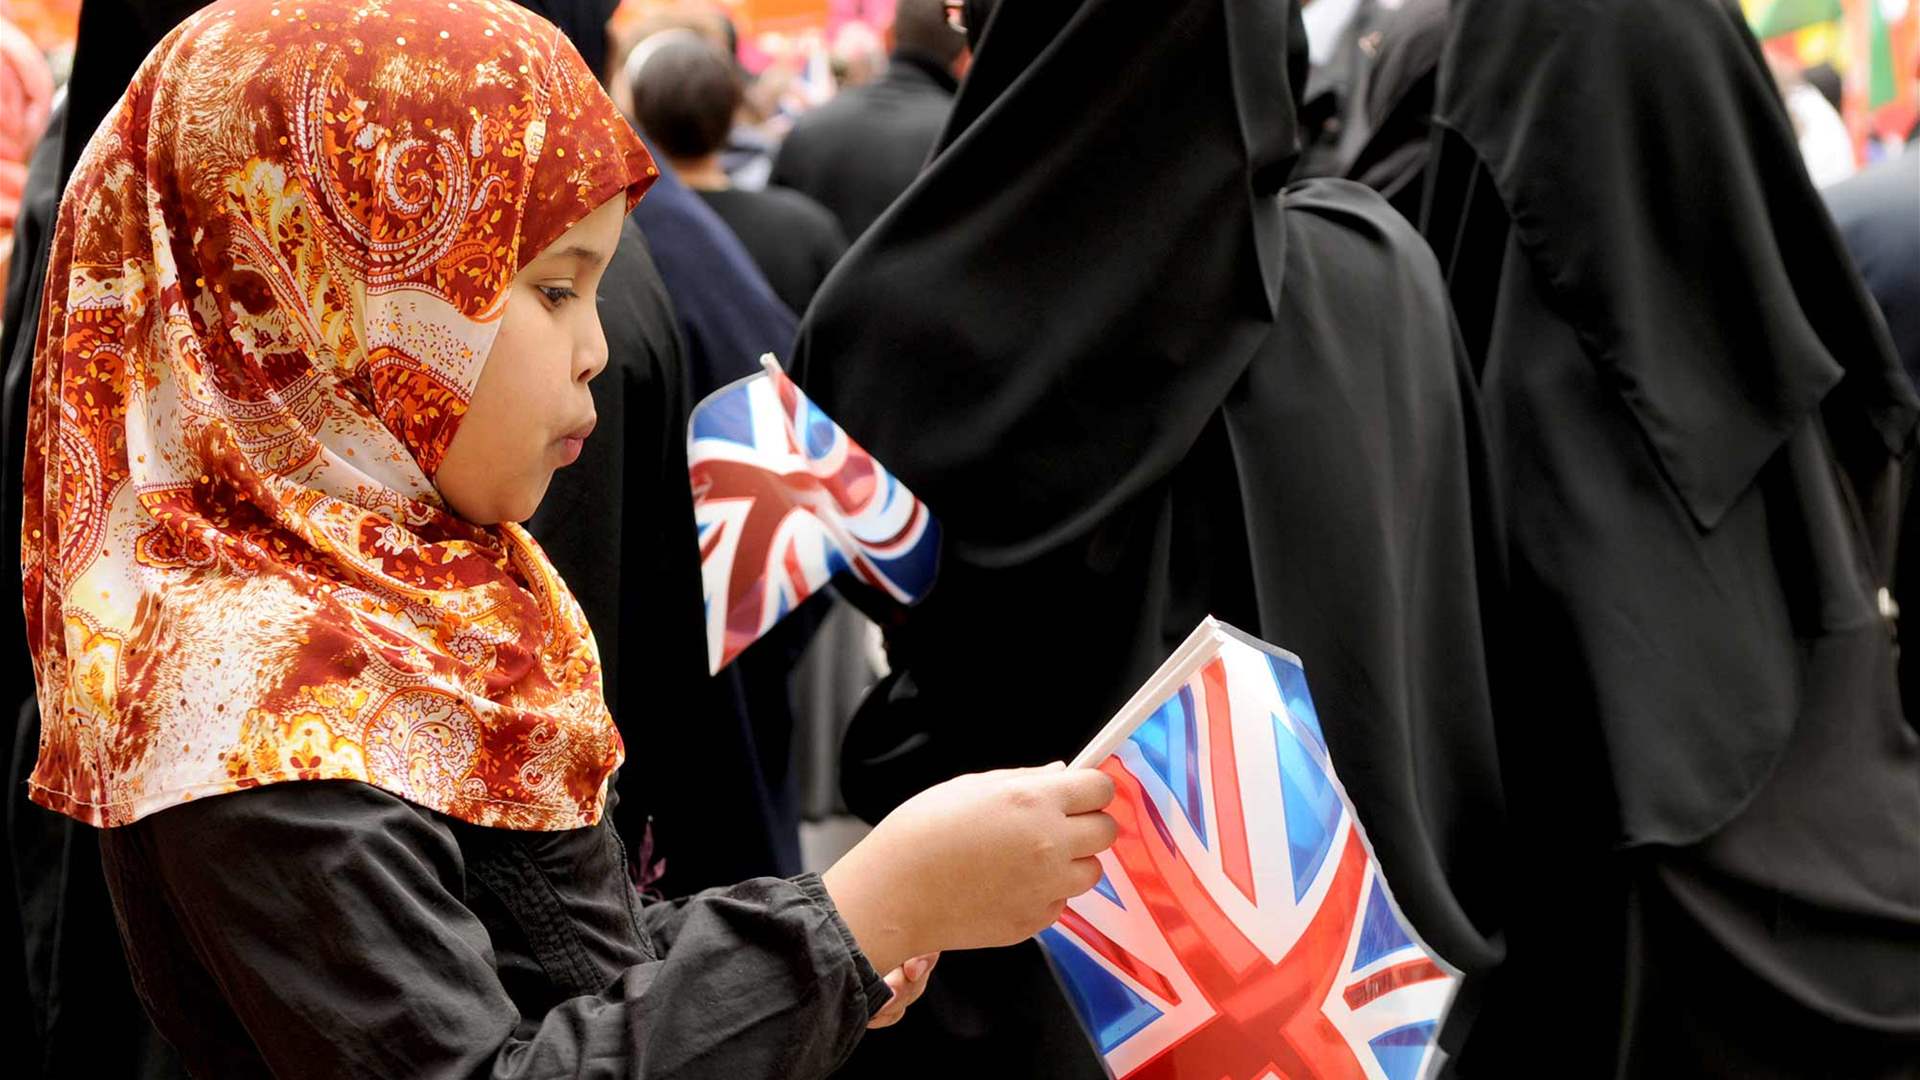 UK reveals new extremism definition amid increased hate crimes against Jews, Muslims